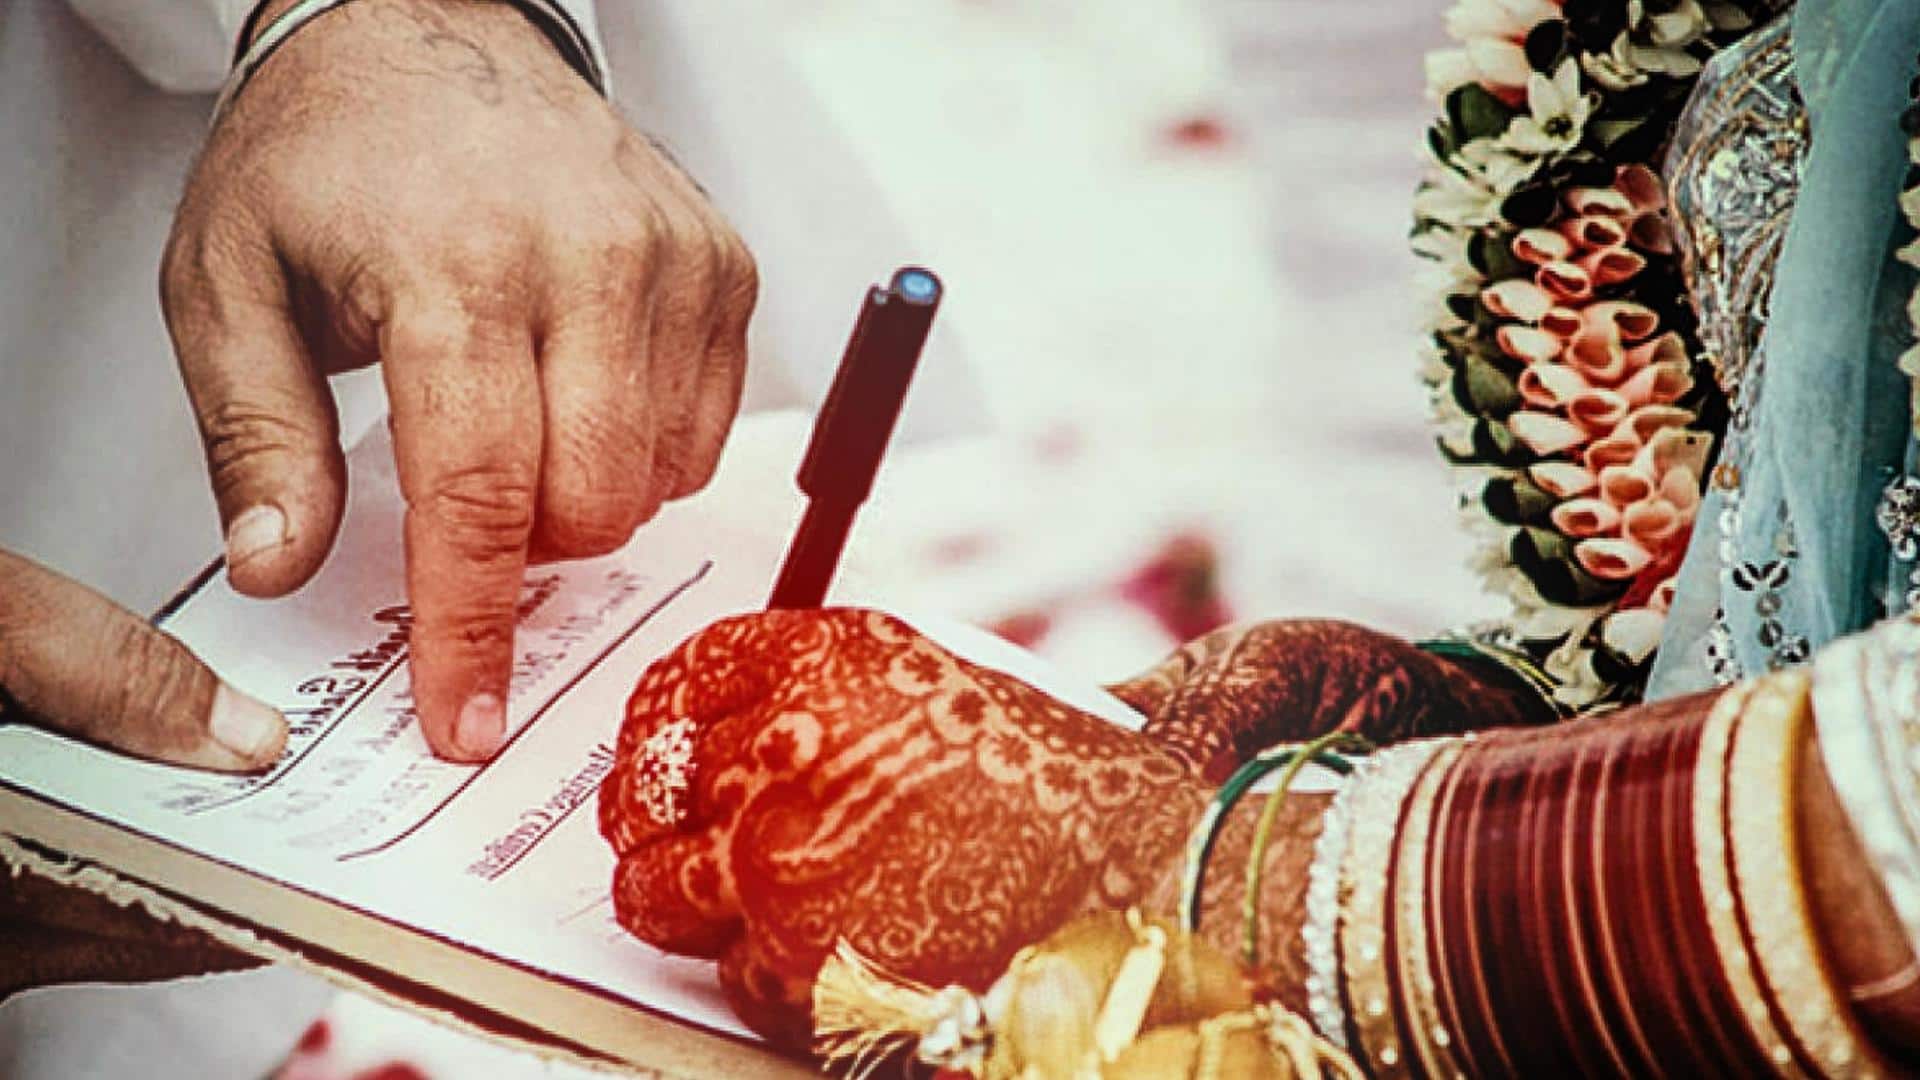 Here's how to obtain marriage certificate in India